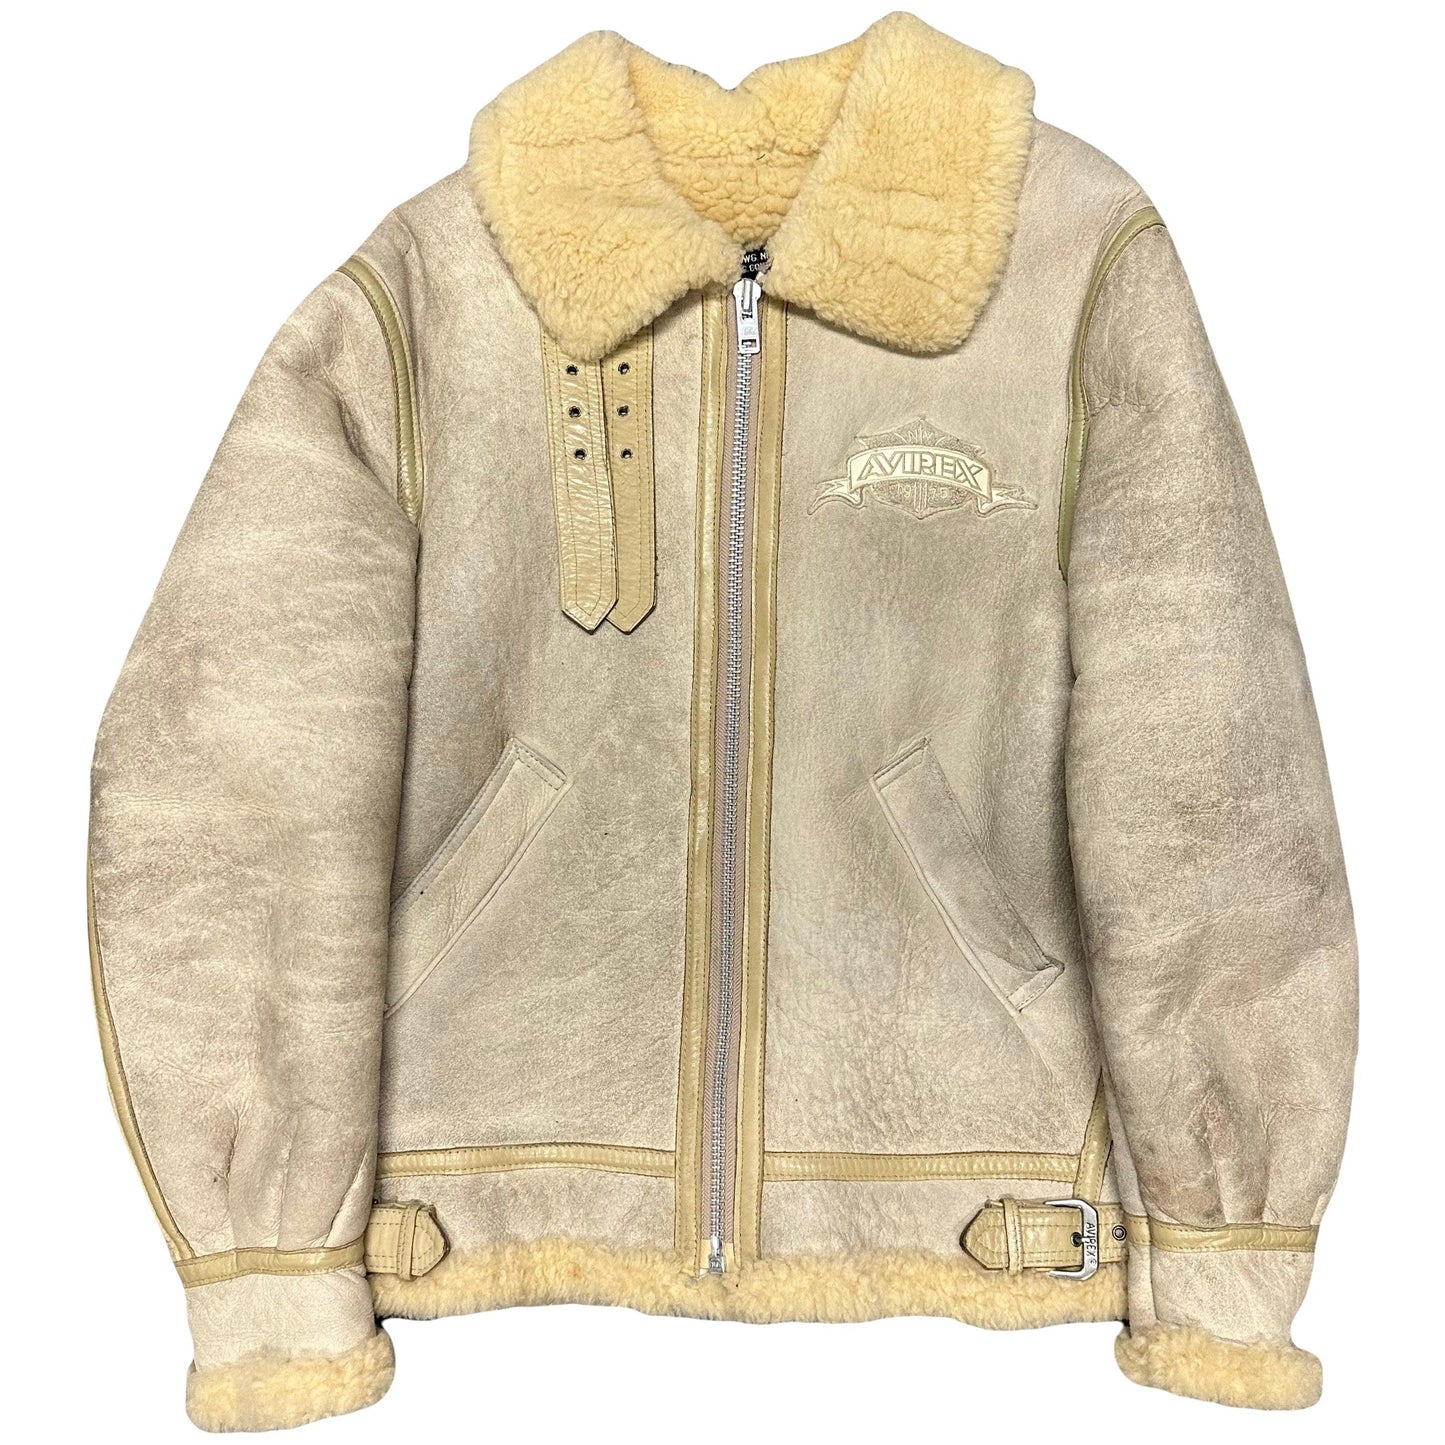 ARCHIVE Avirex Spellout B-3 Sherpa Jacket ( L ) - Known Source